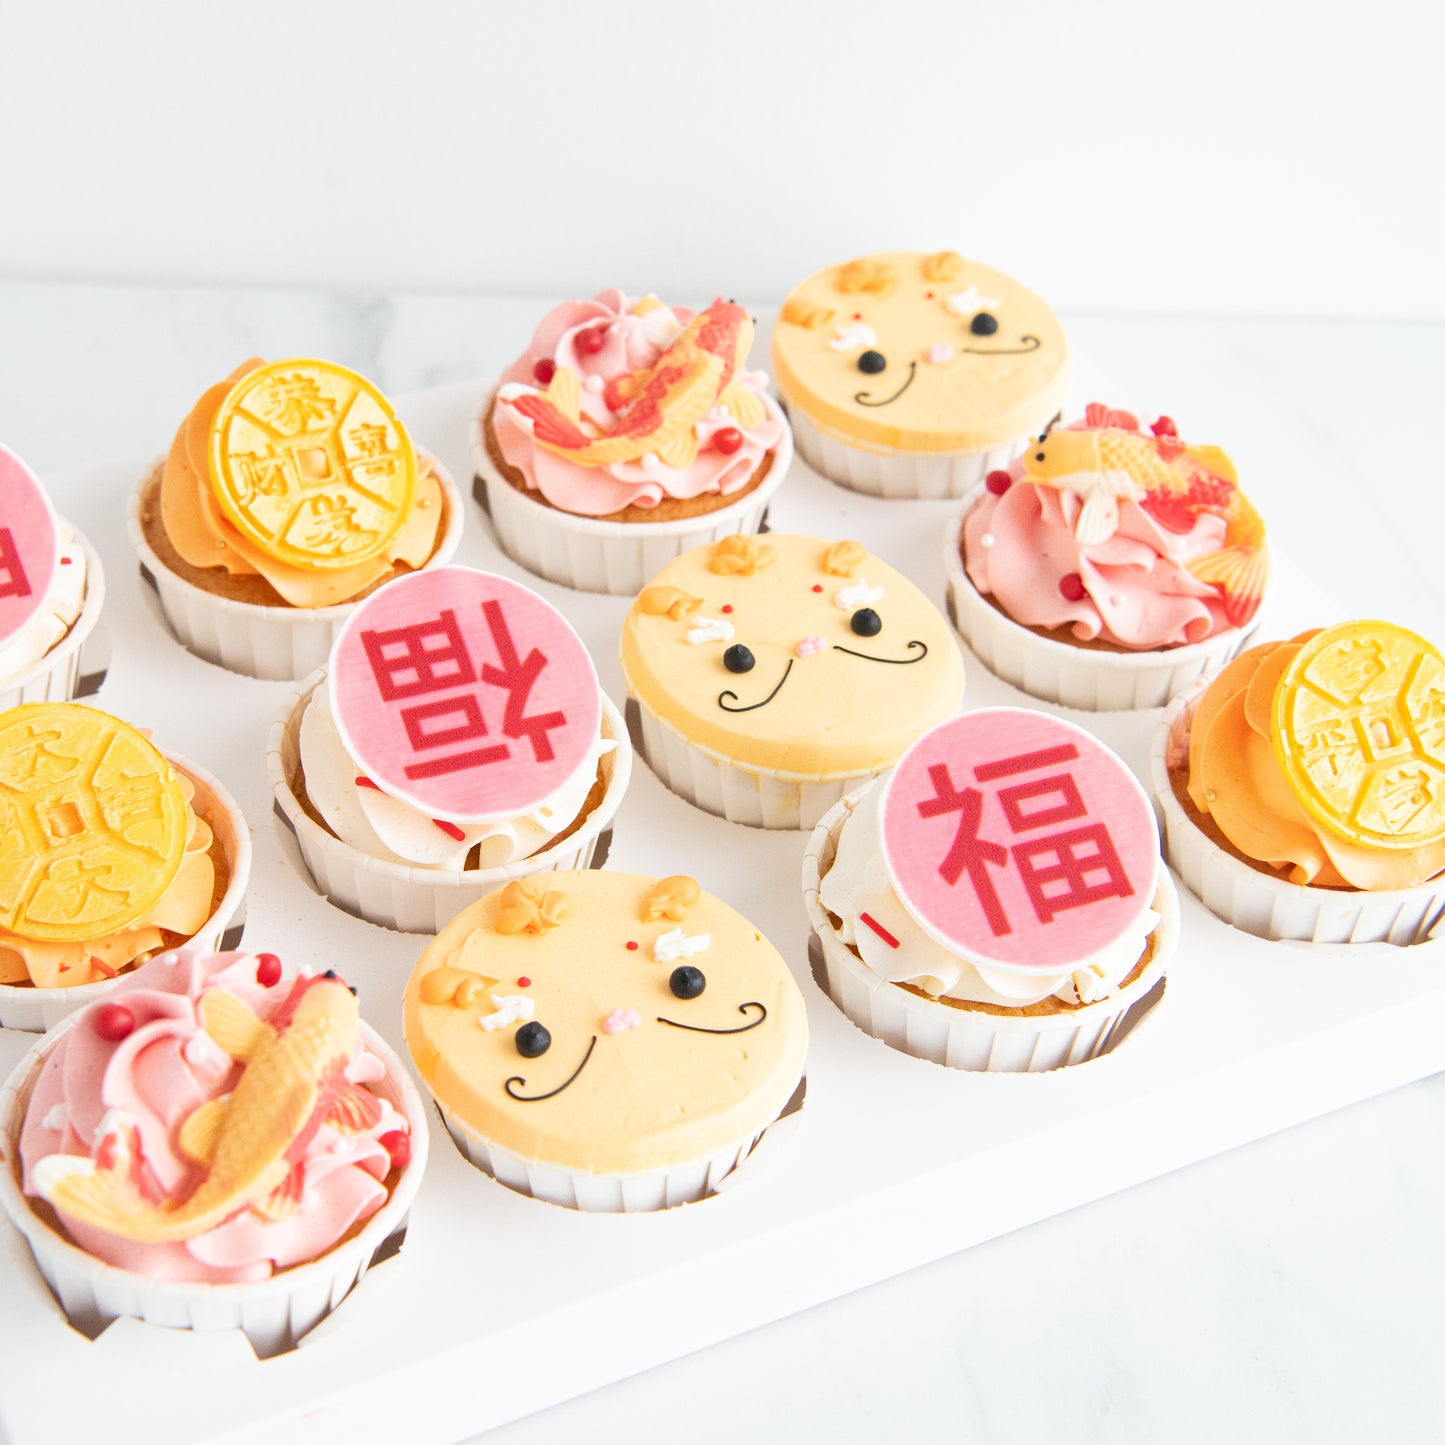 Year Of The Dragon! | Lunar Cupcakes 12 pcs in Gift Box | $68.80 Nett